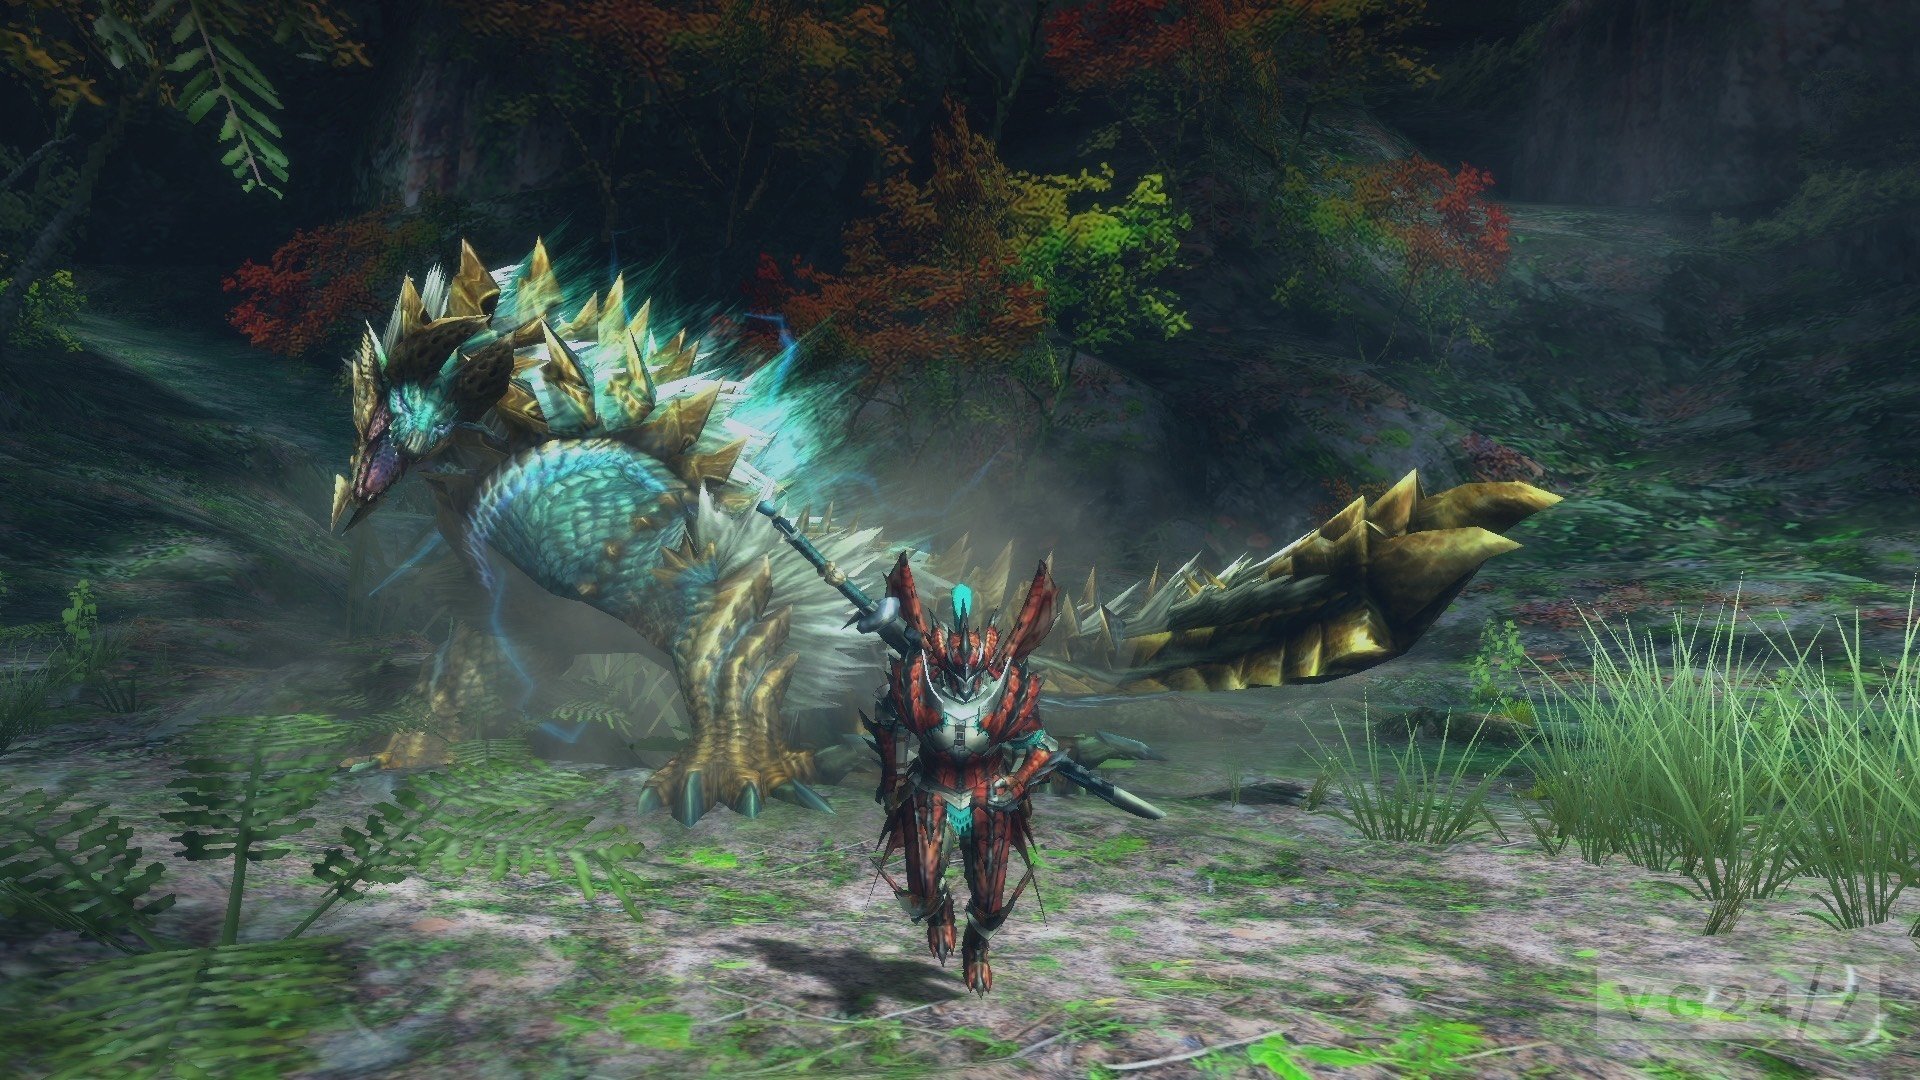 Monster Hunter 4 Ultimate Players to Receive Free Item Packs